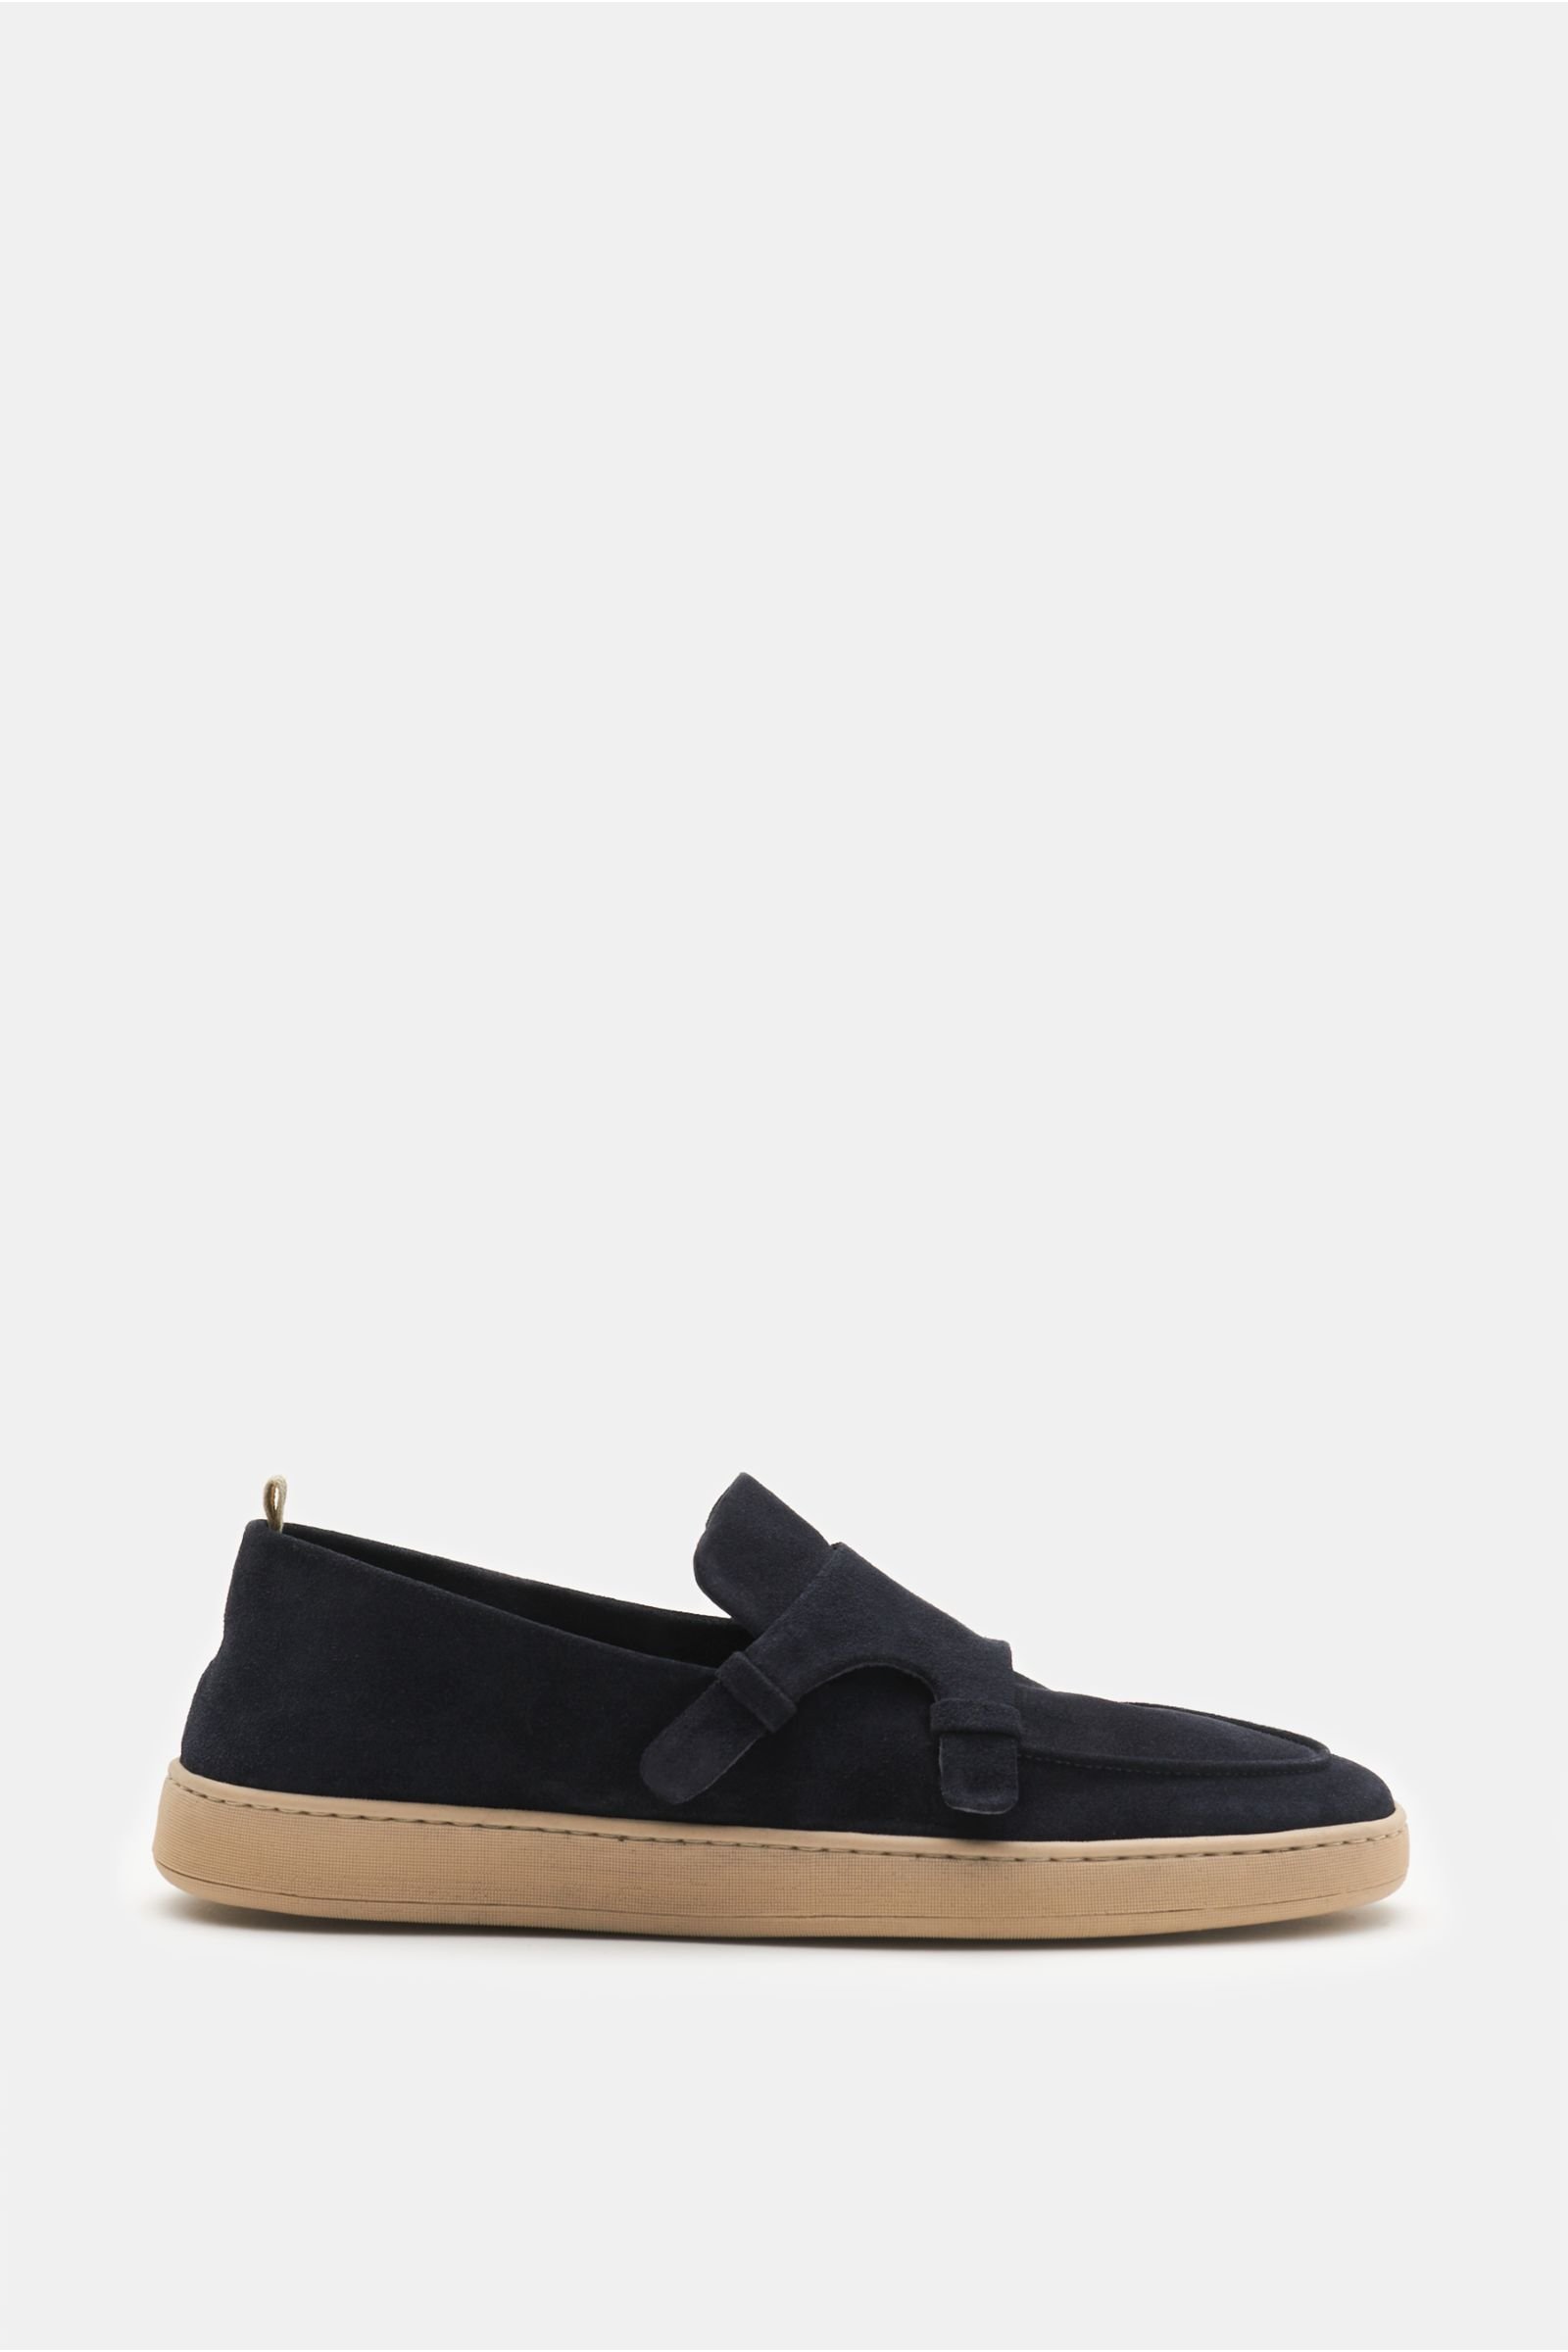 Double monk shoes 'Herbie 005' navy